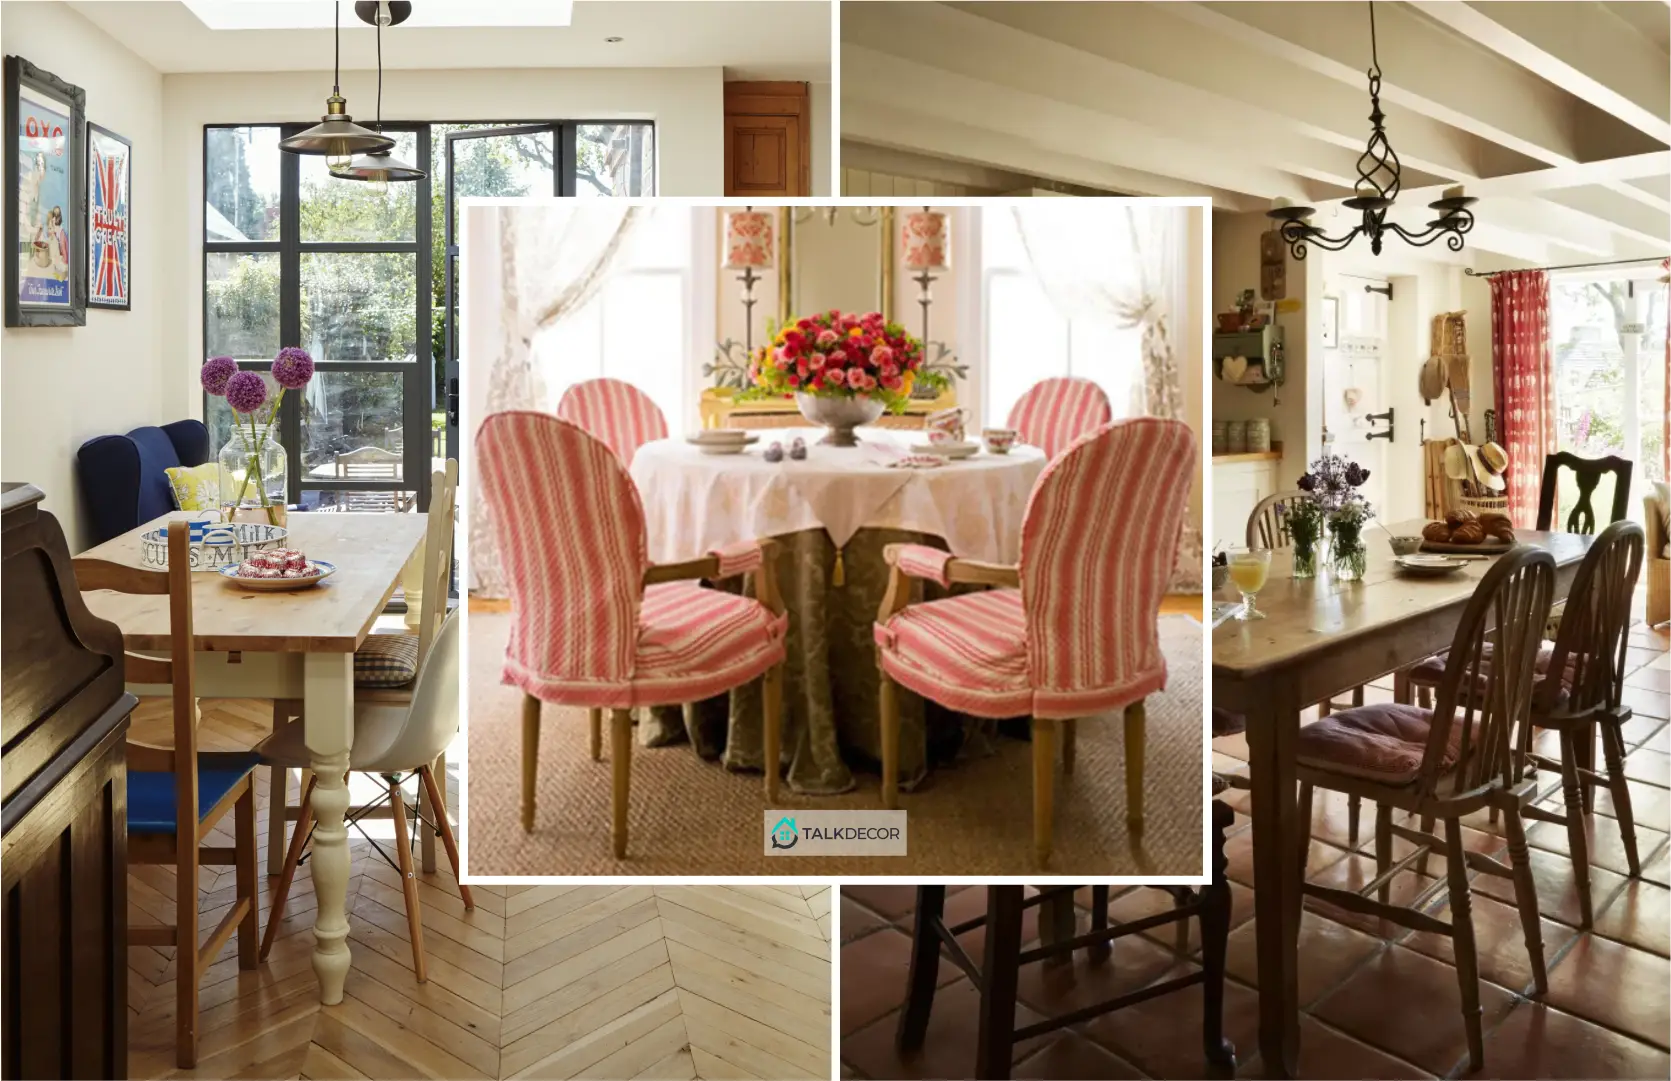 How to Make Your Traditional Dining Room More Welcoming to Guests